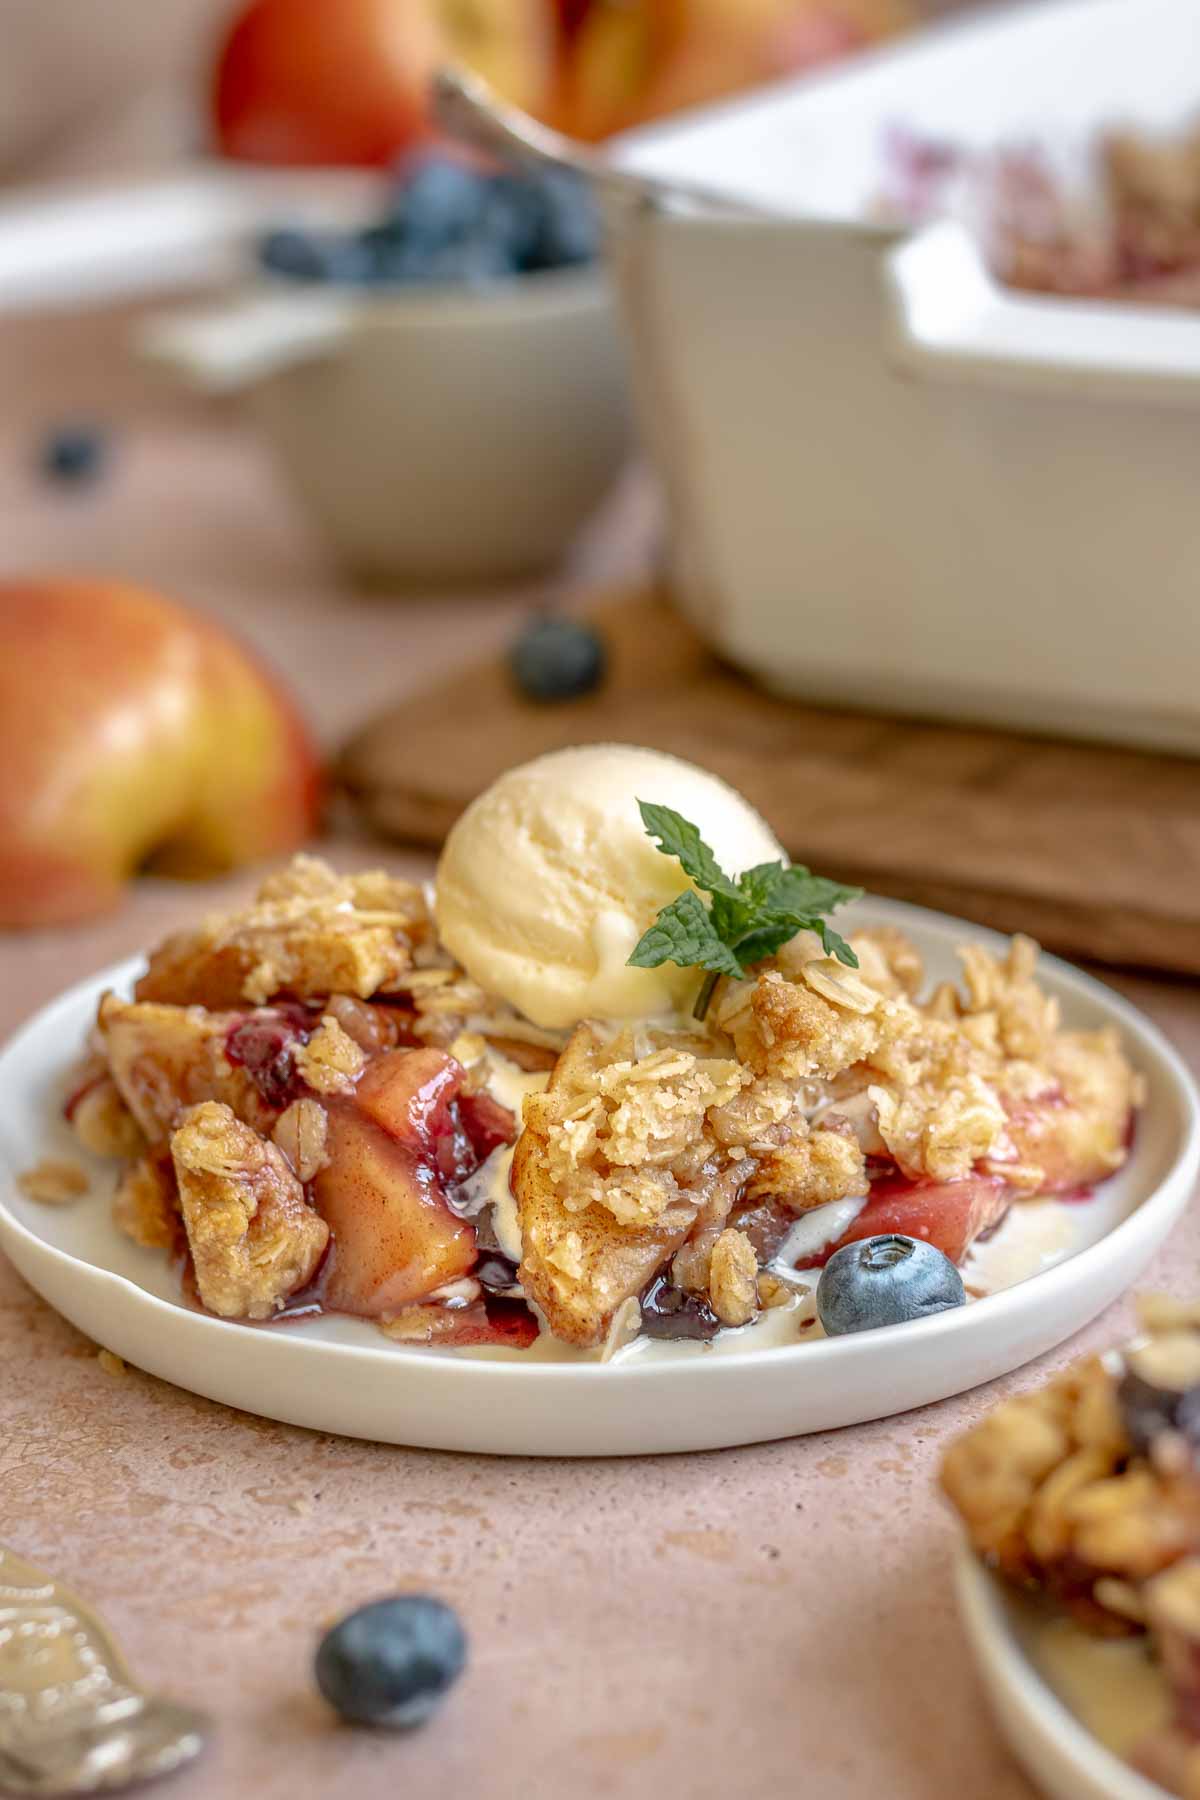 Apple blueberry crisp on a plate with a scoop of ice cream on top.